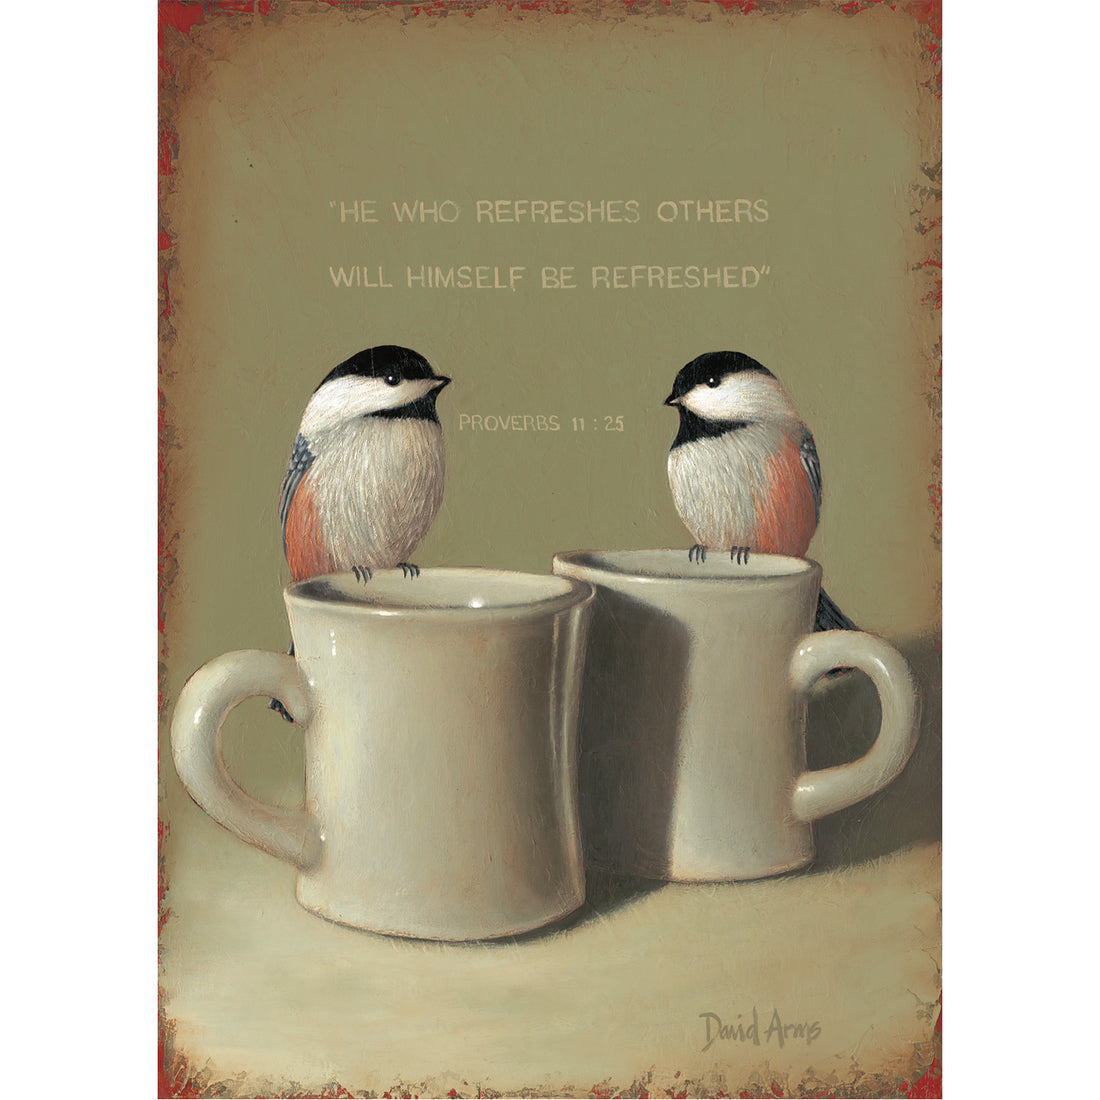 An illustration of two chickadees resting on the edges of two white coffee cups over a sage green background, with Bible quote &quot;Proverbs 11:25&quot; printed above the birds.